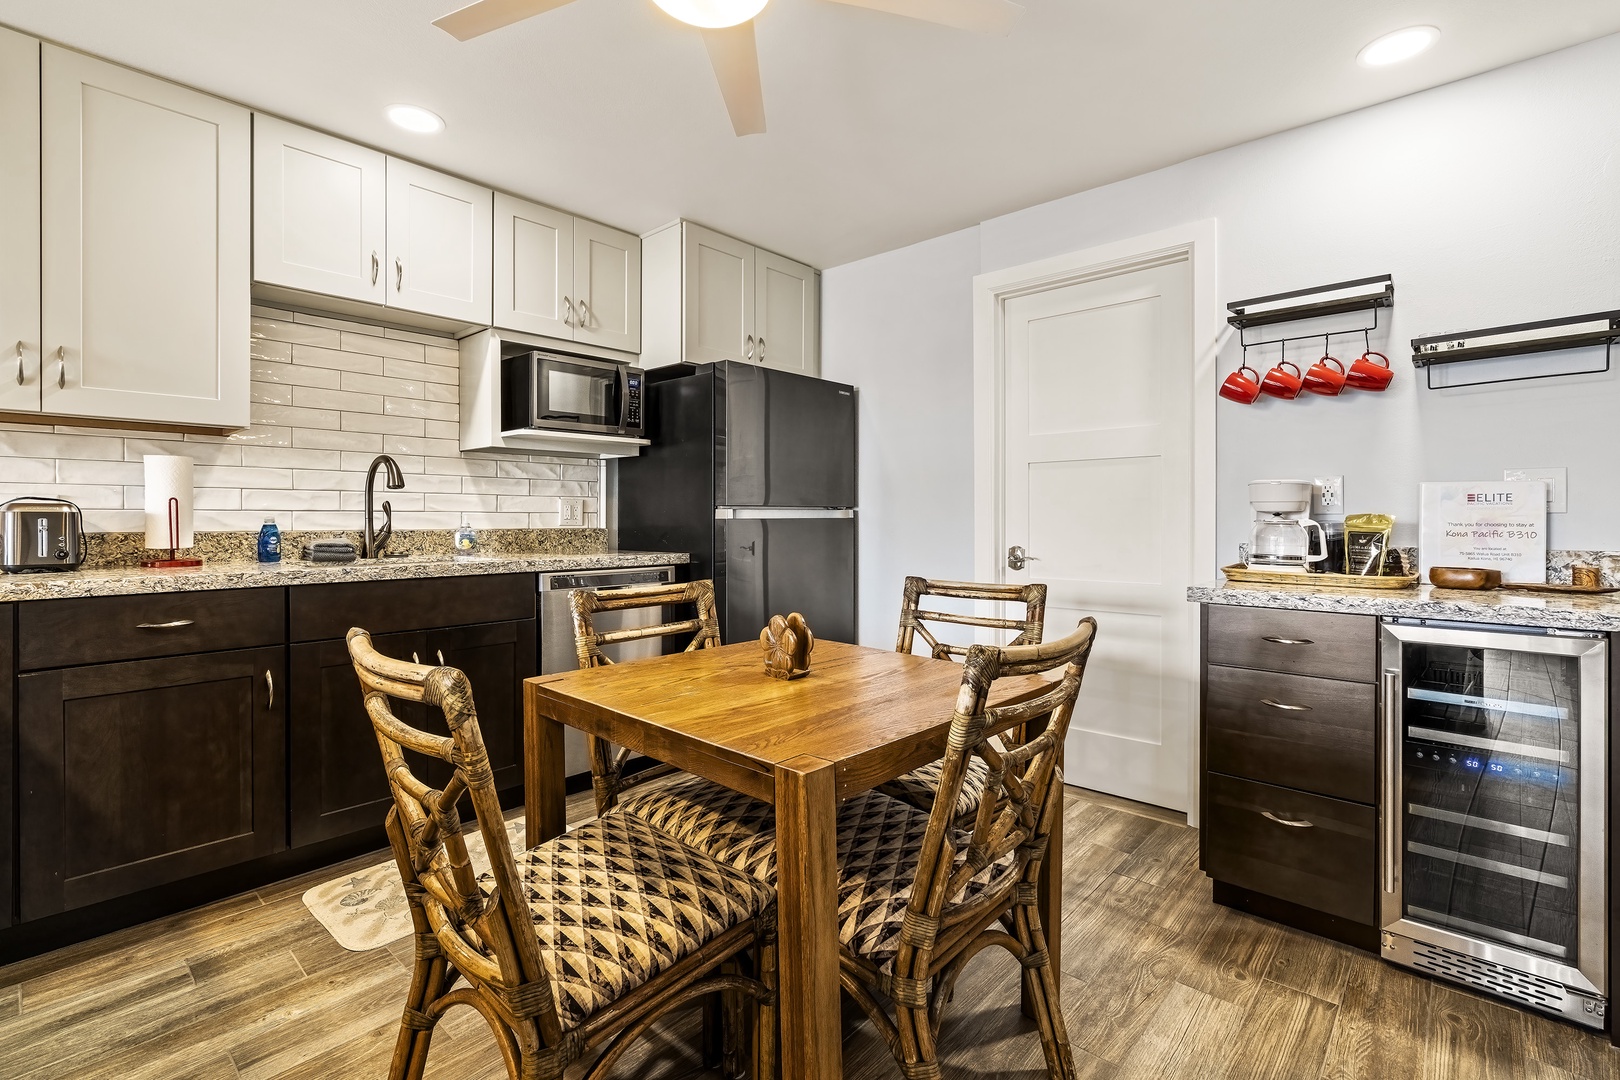 Kailua Kona Vacation Rentals, Kona Pacific B310 - Indoor dining in the spacious kitchen